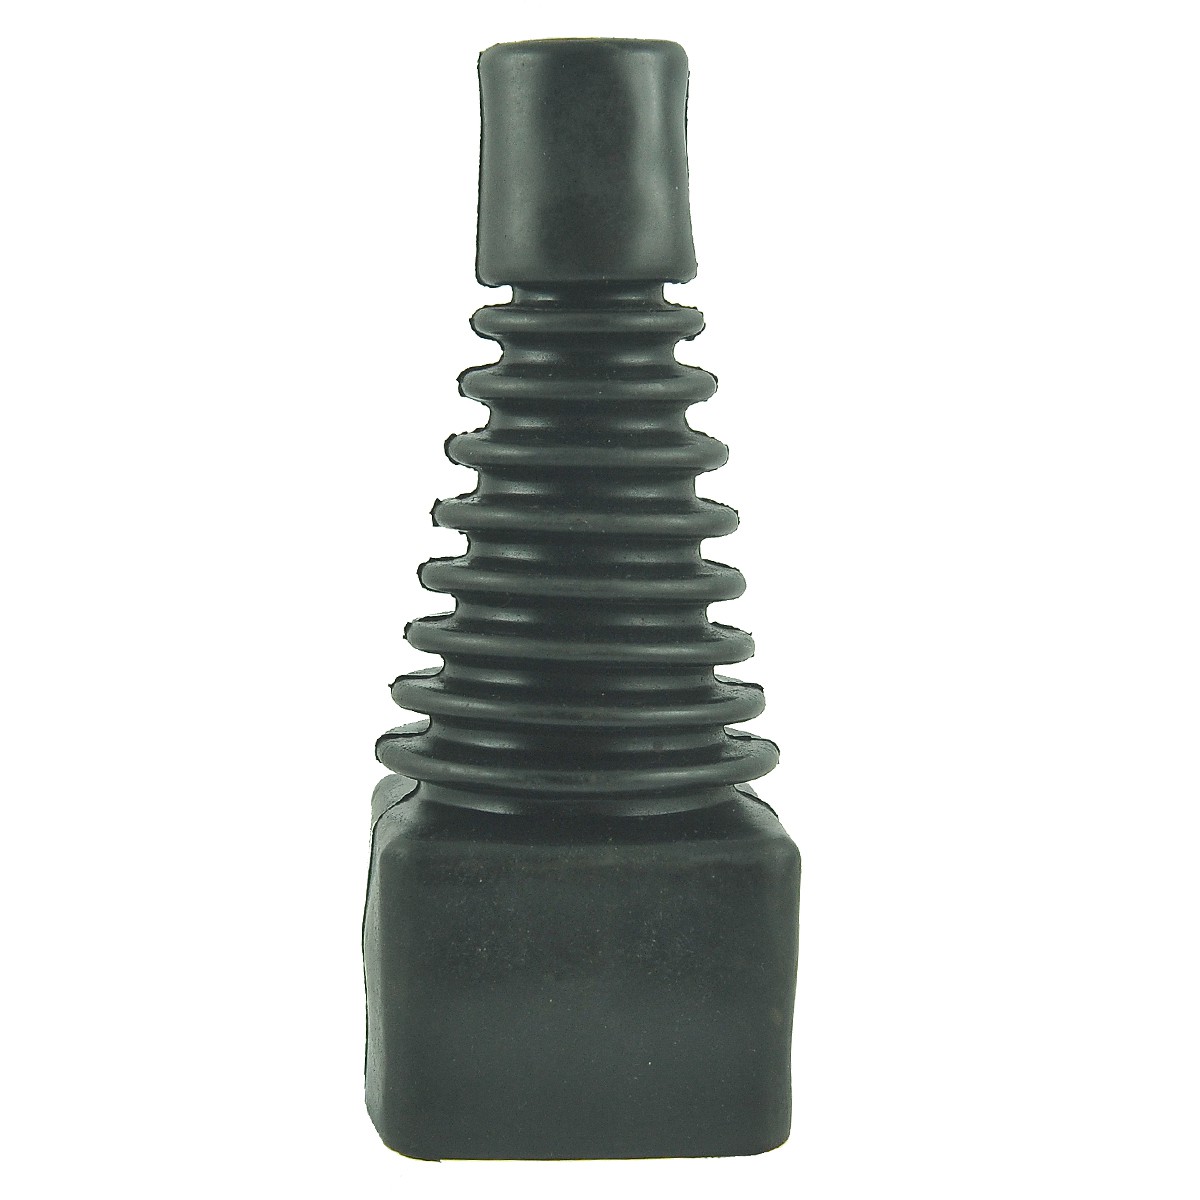 Rubber cover for the joystick of the TUR / 609 multi-section distributor